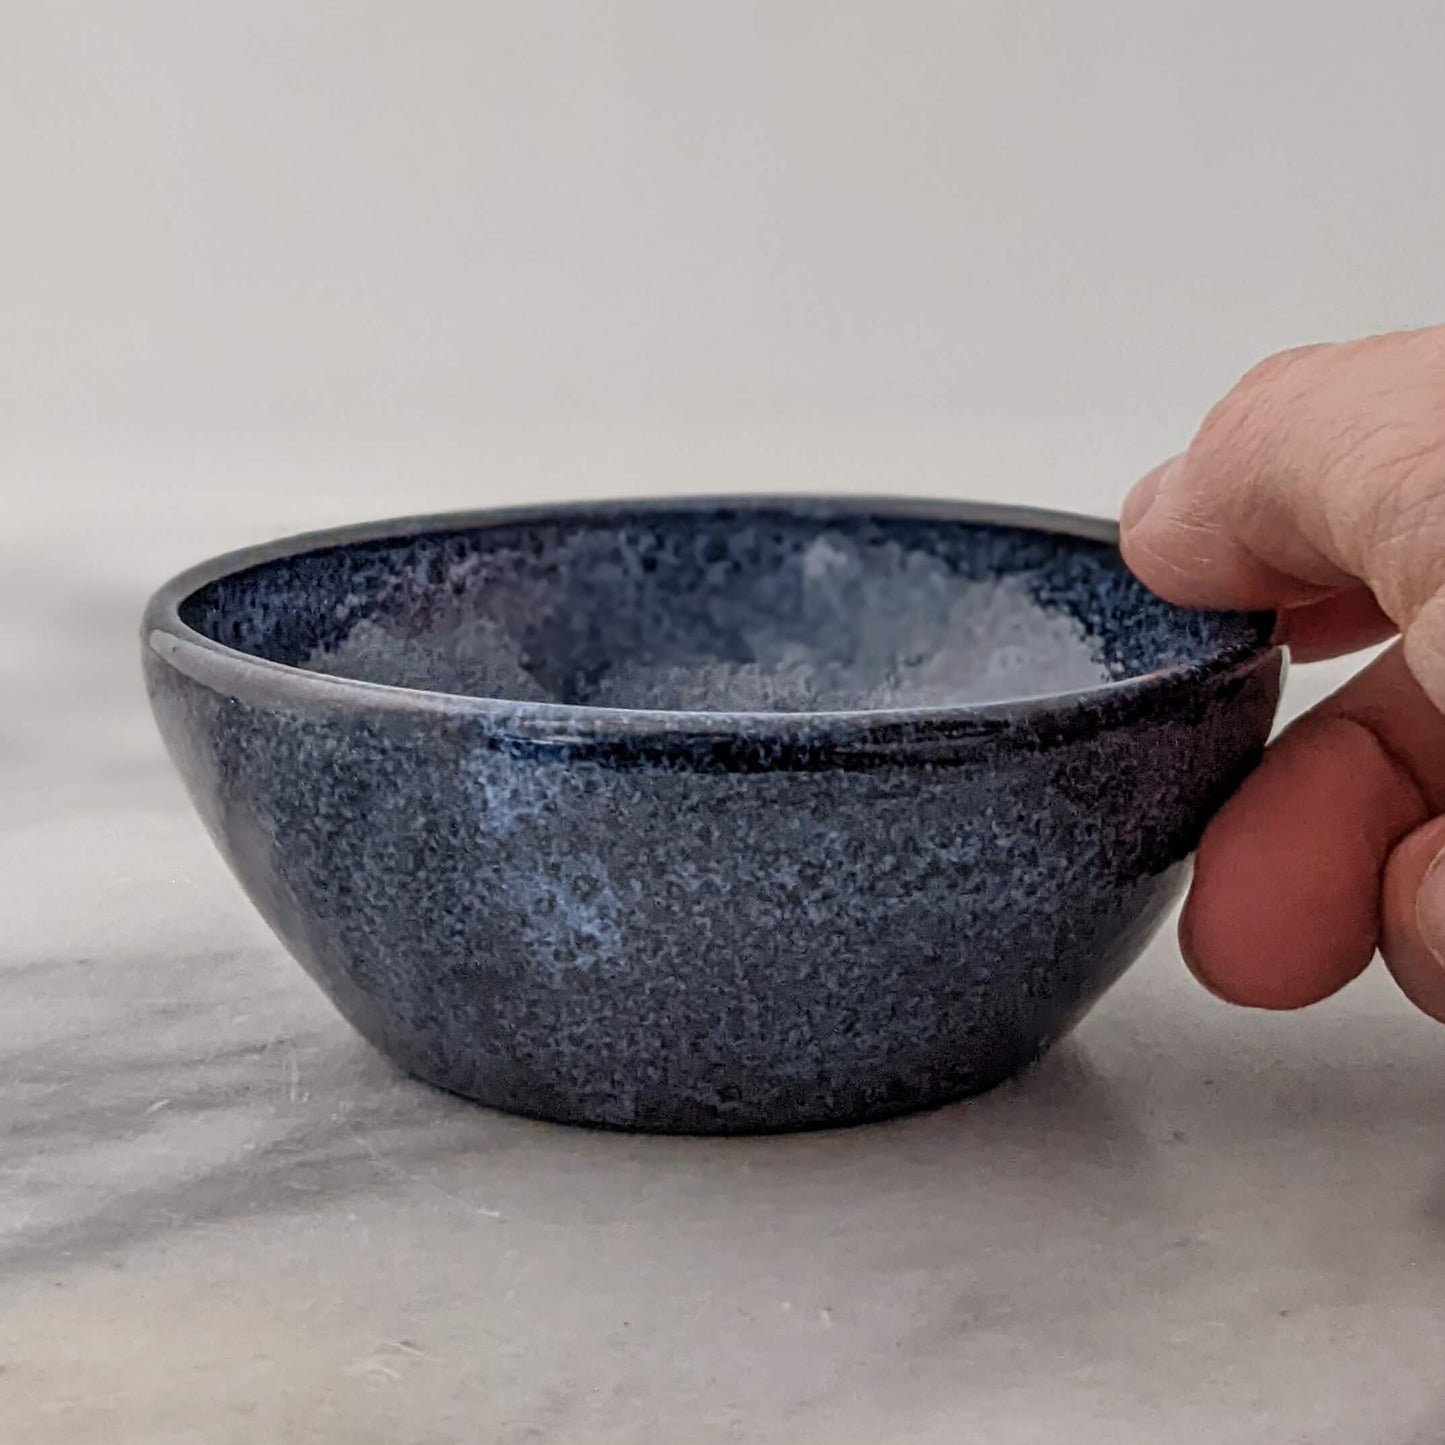 Small Bowl for Snacks or Jewels